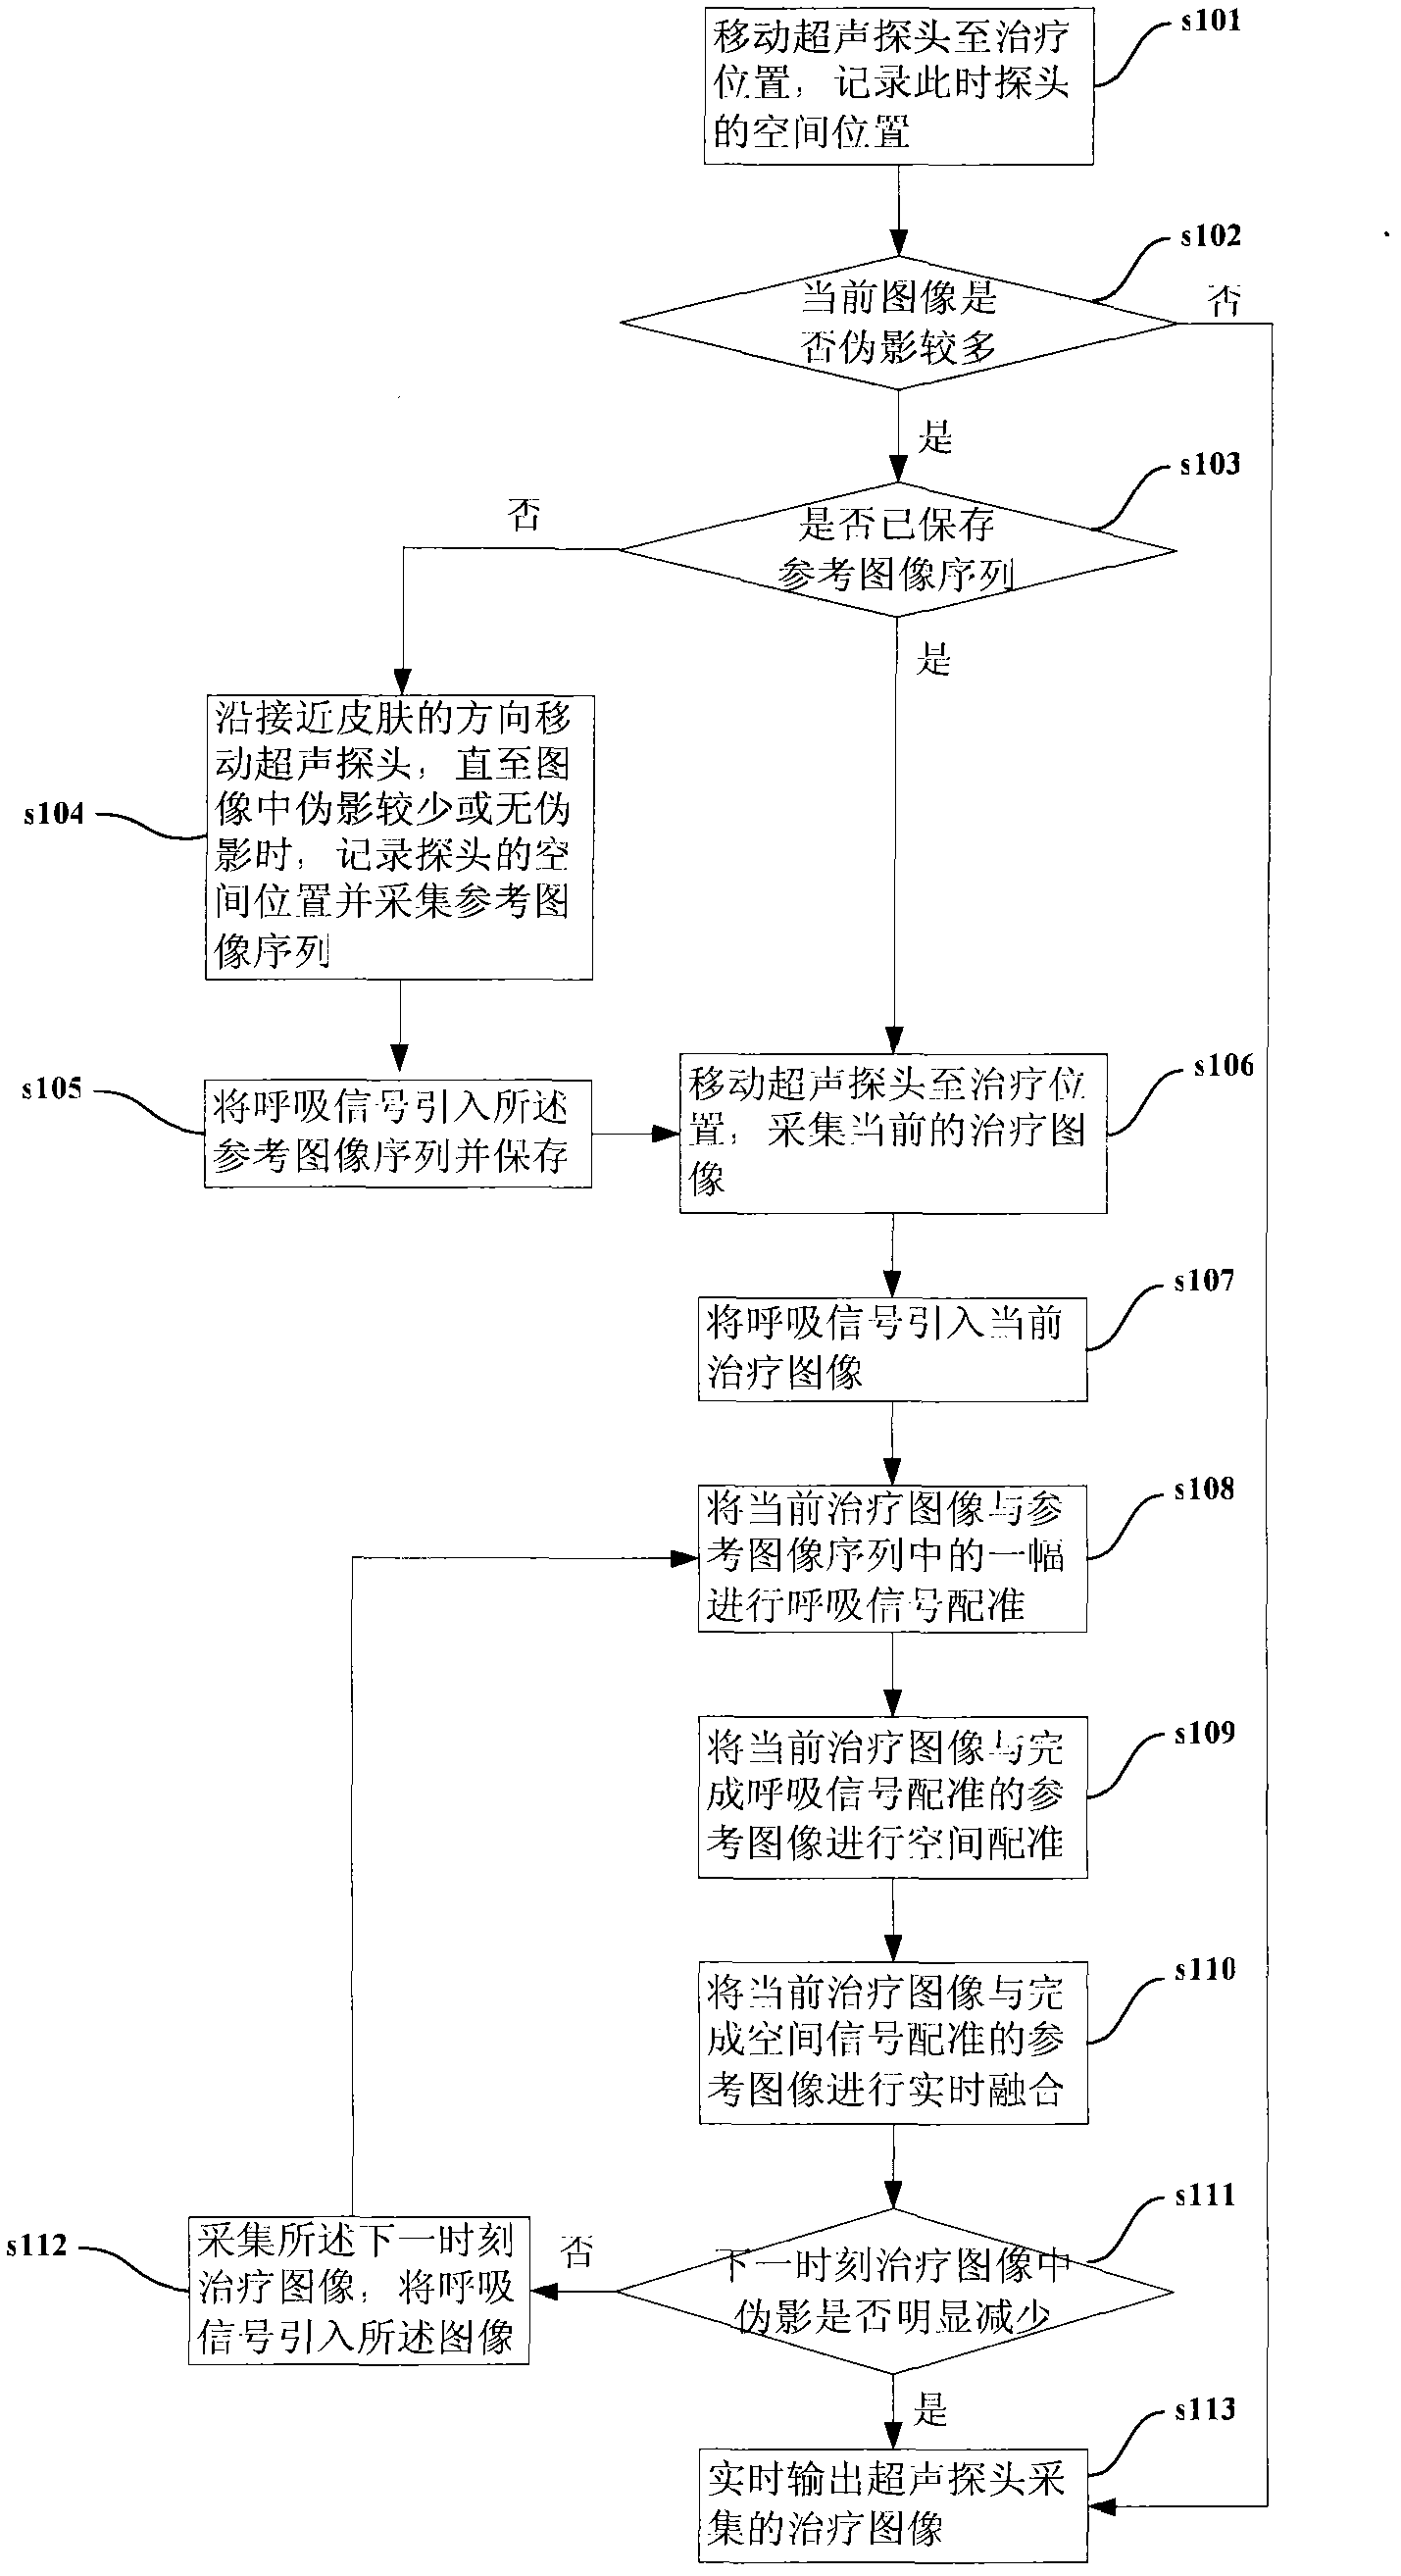 Method and device for reducing artifacts in image in real time